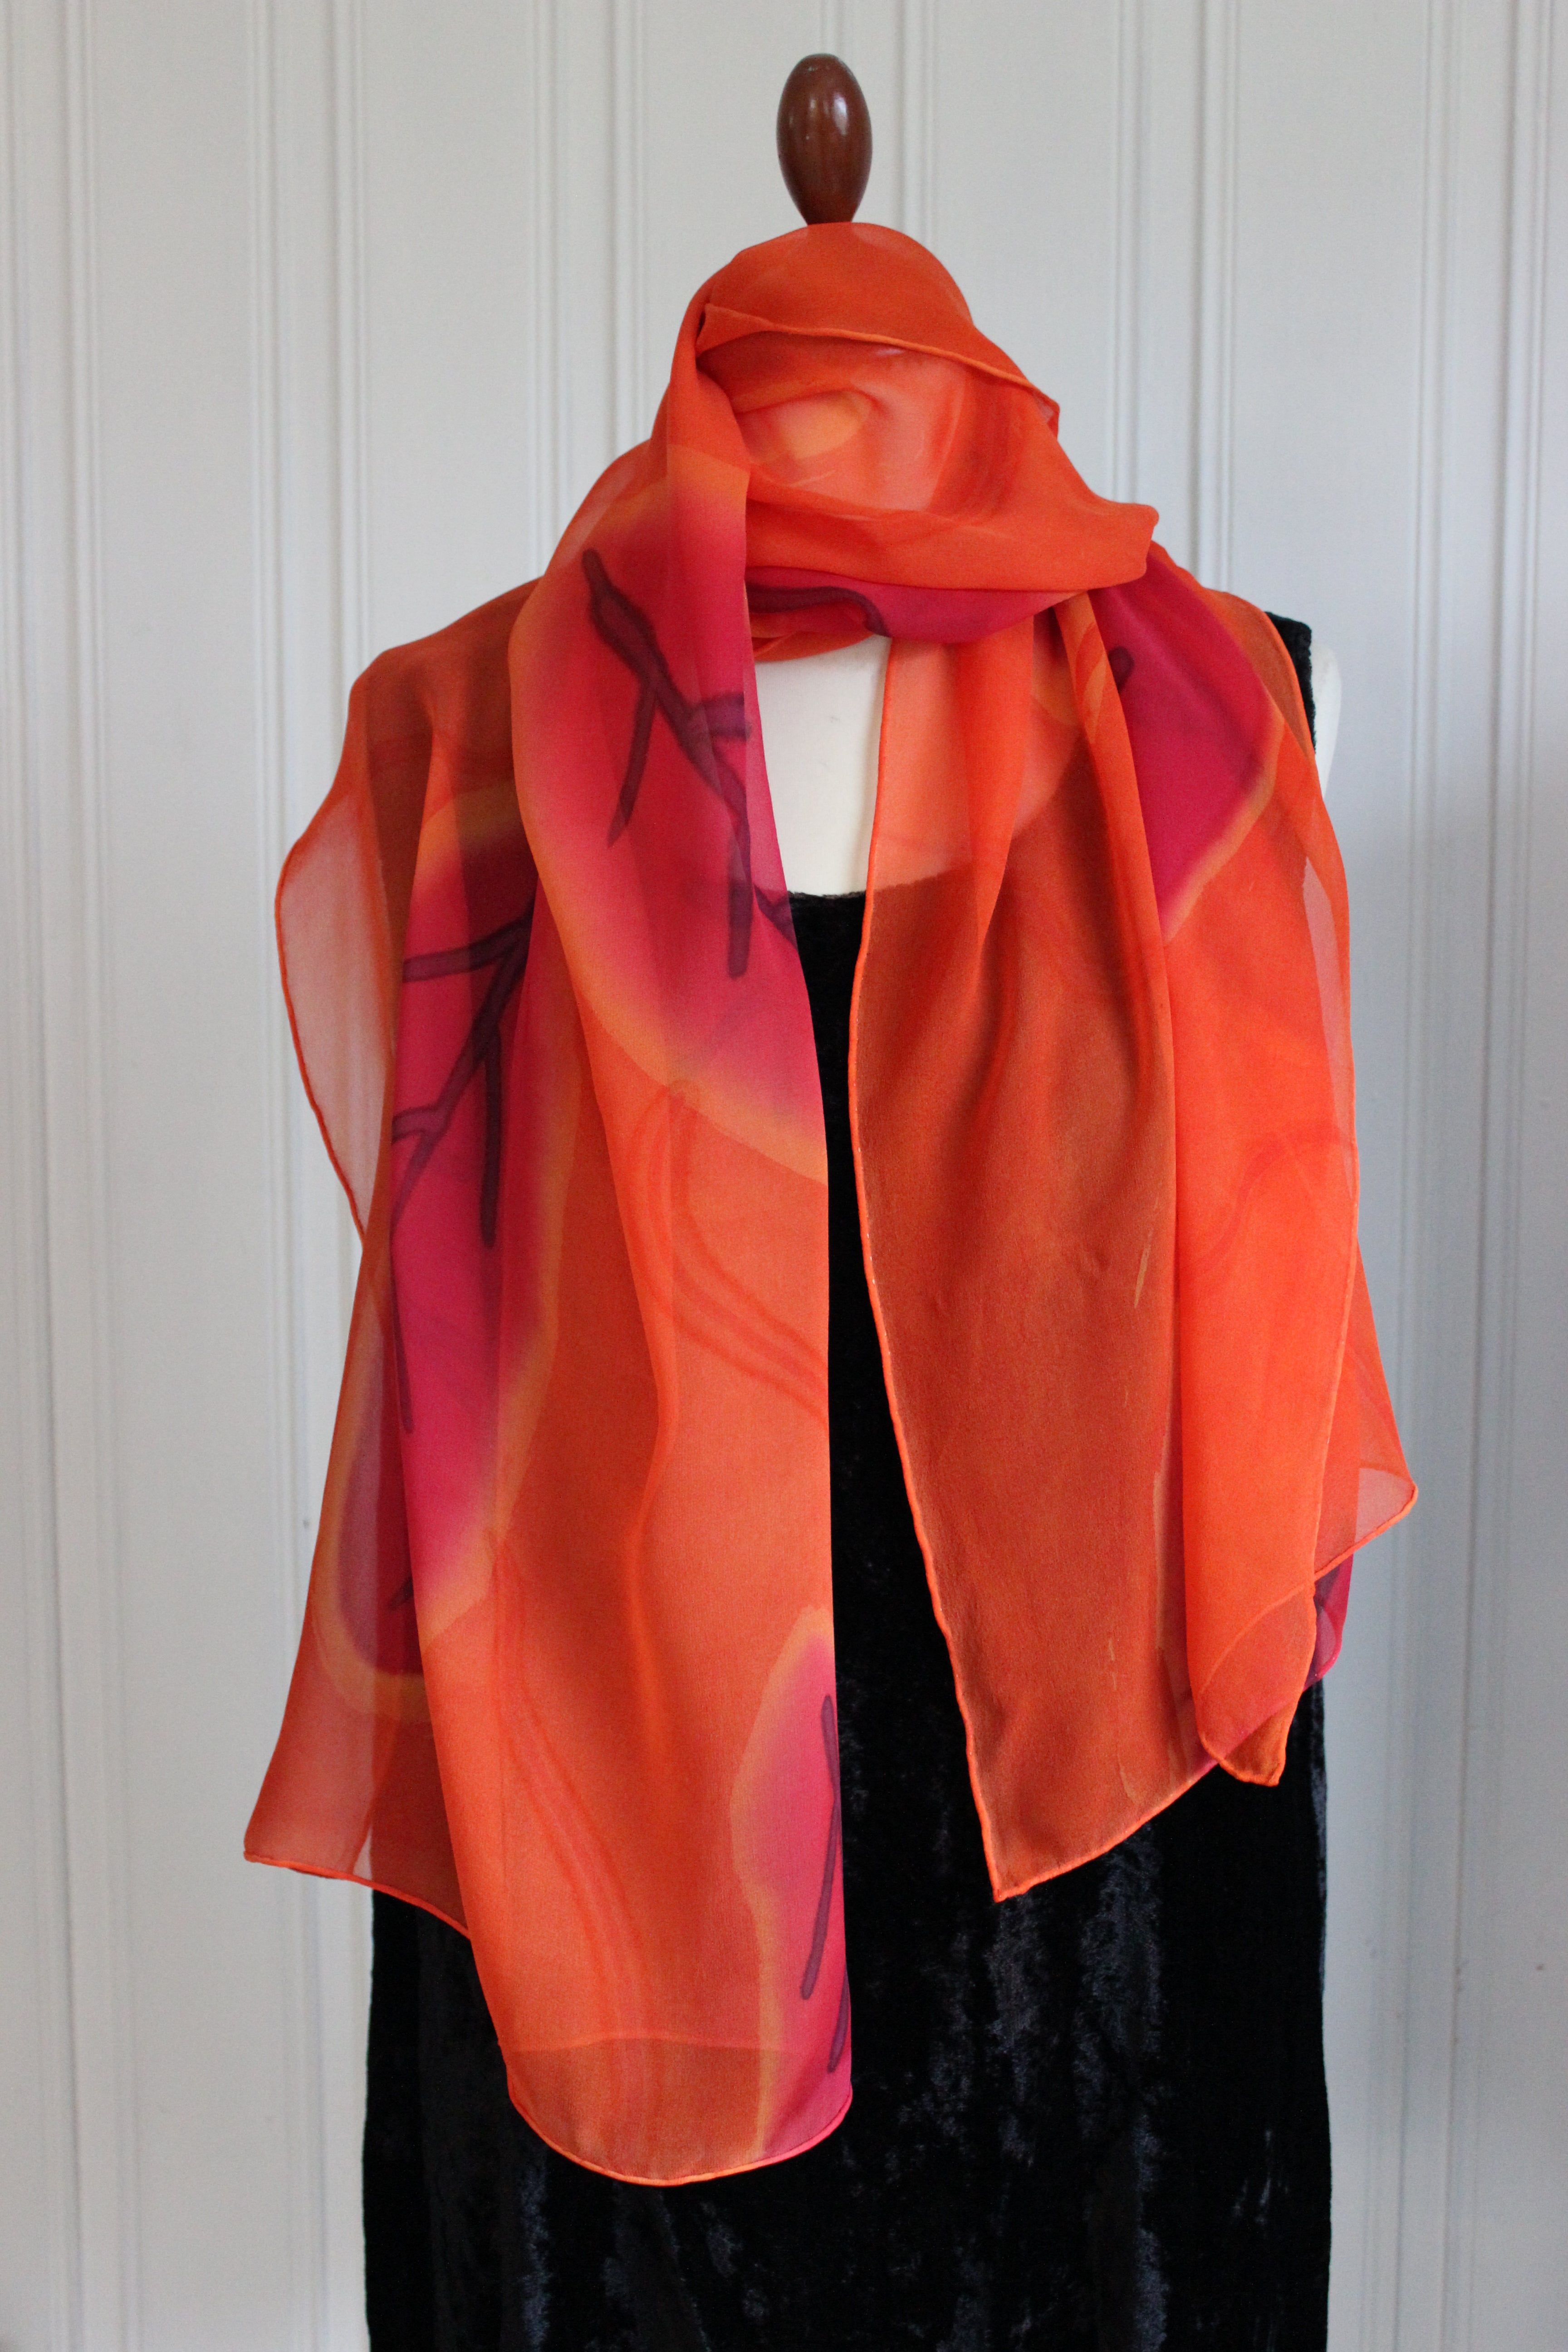 Hand painted silk scarf 4363